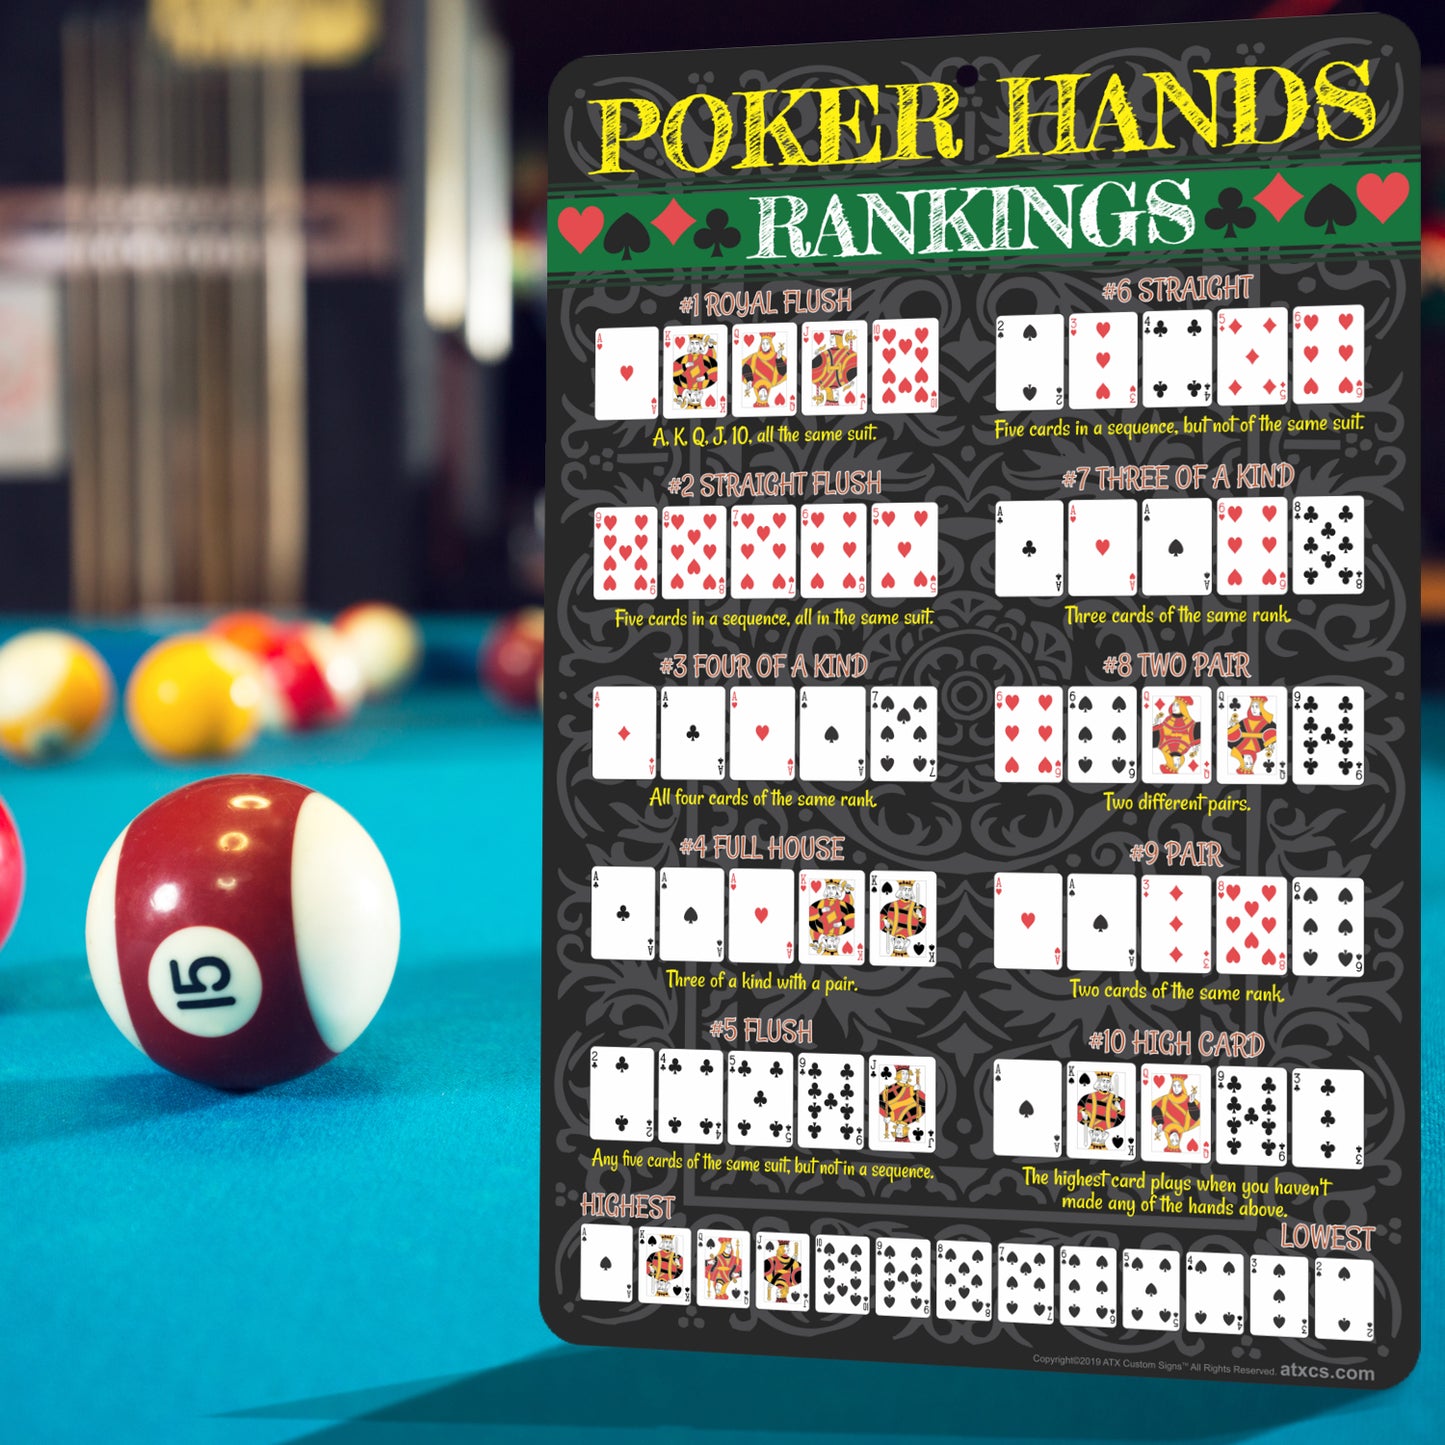 Poker Hands Rankings Sign, Royal Flush, Straight Flush, Four of a Kind, Full House, Flush, Straight, Three of a Kind & more - Size 8 X 12